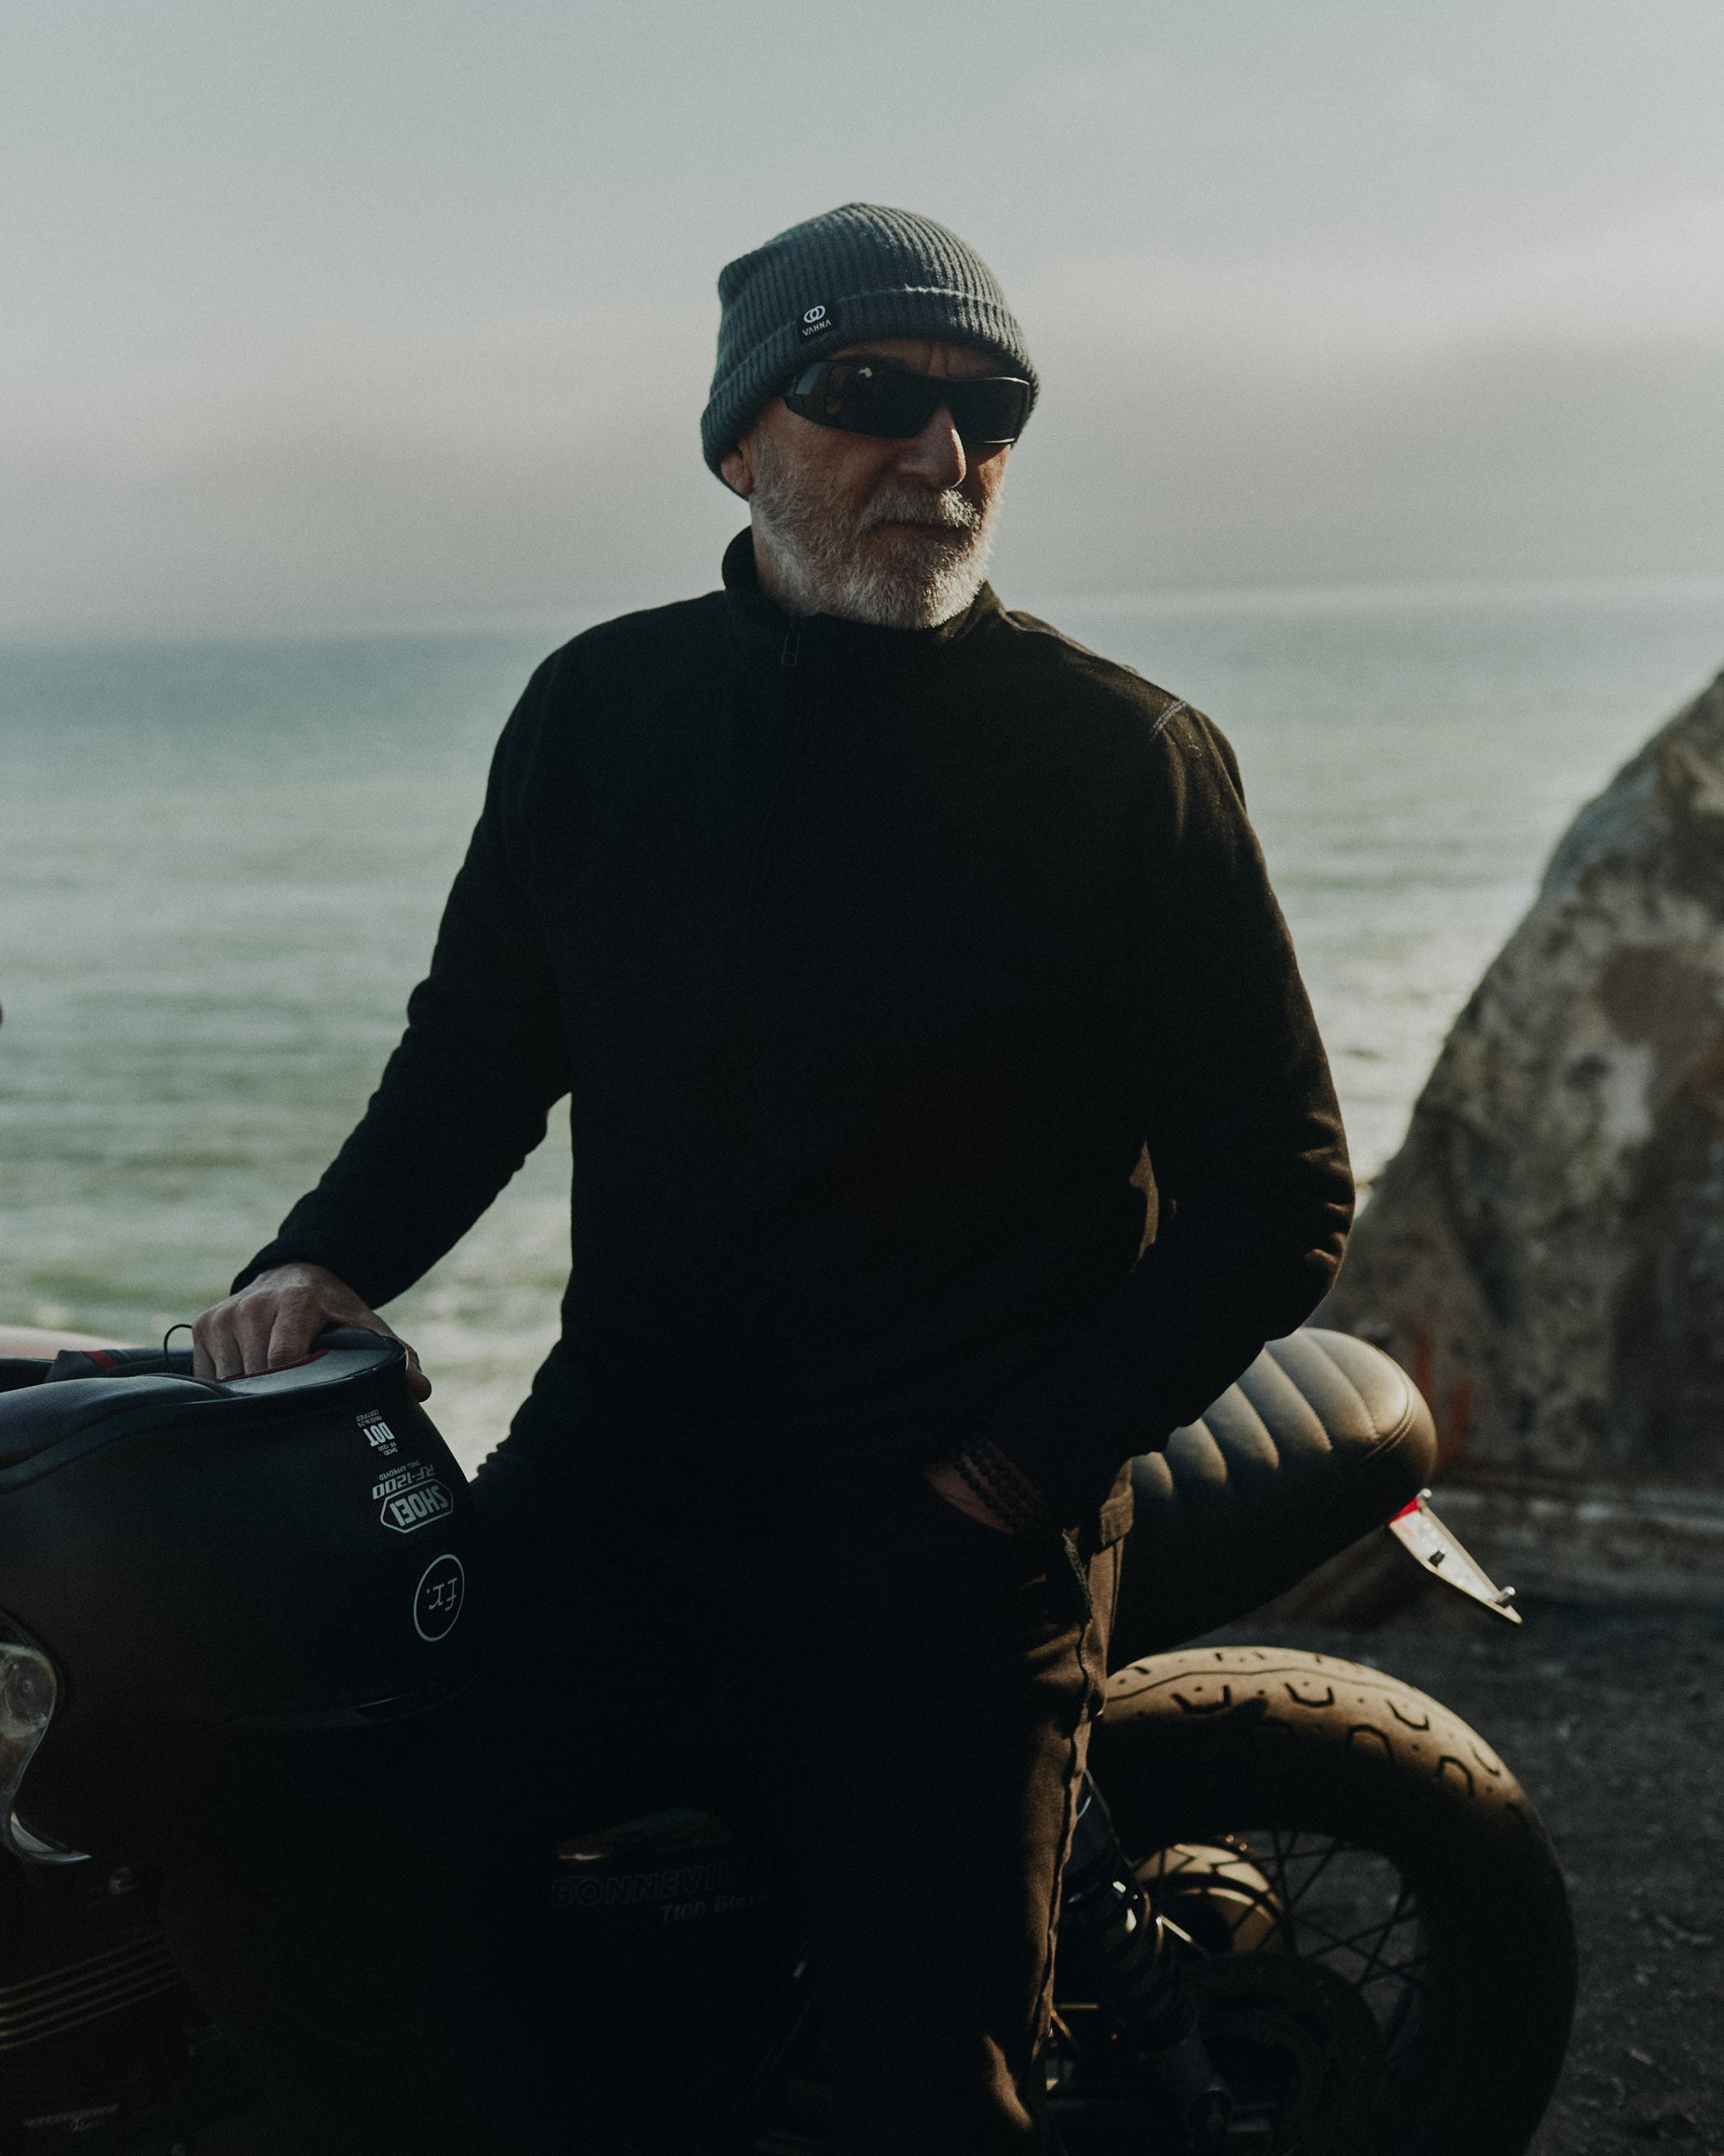 Ralph Dunning sitting on a vintage Triumph motorbike overlooking the Pacific ocean wearing the Foreign Rider Quarter Zip Sweatshirt